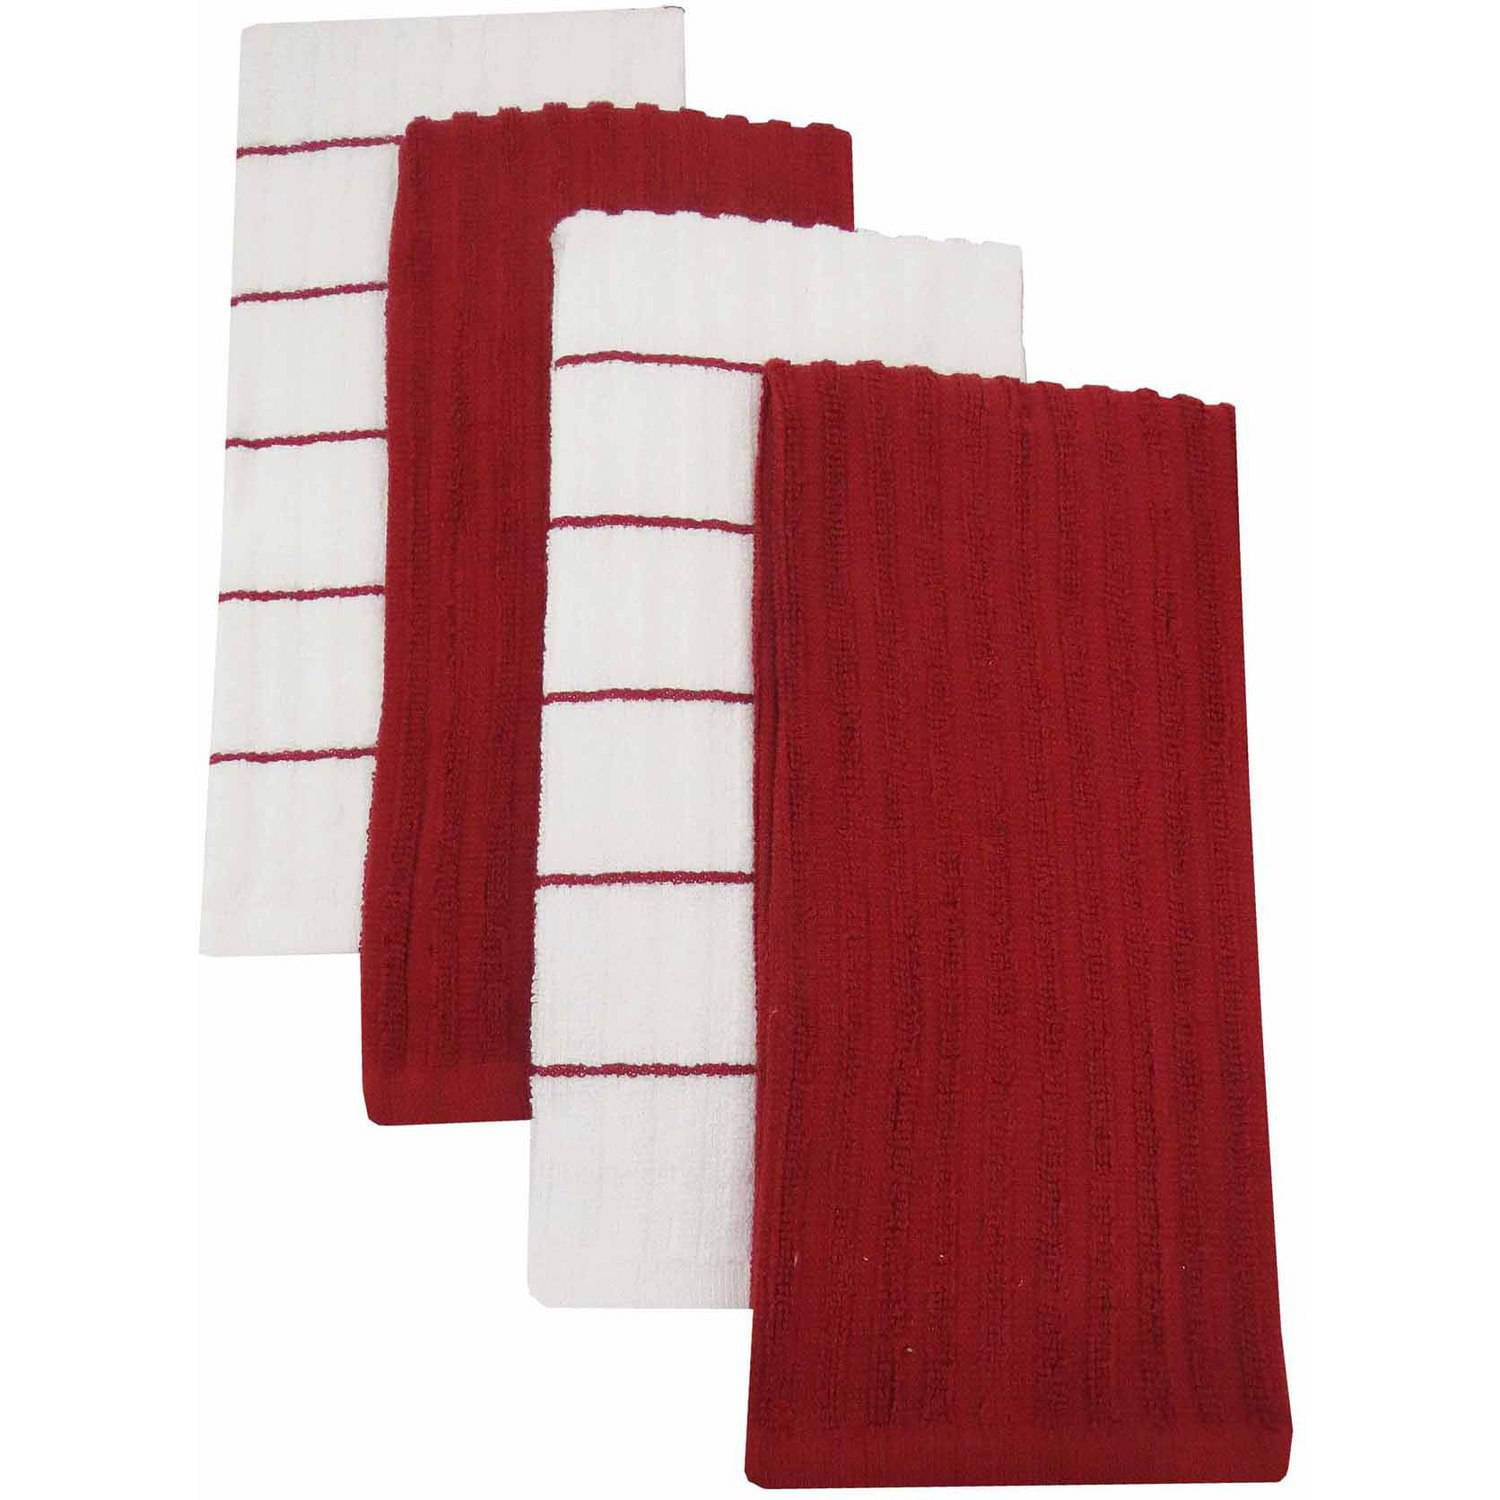 Red Chenille Hands Towel, Chinese Kitchen Towel